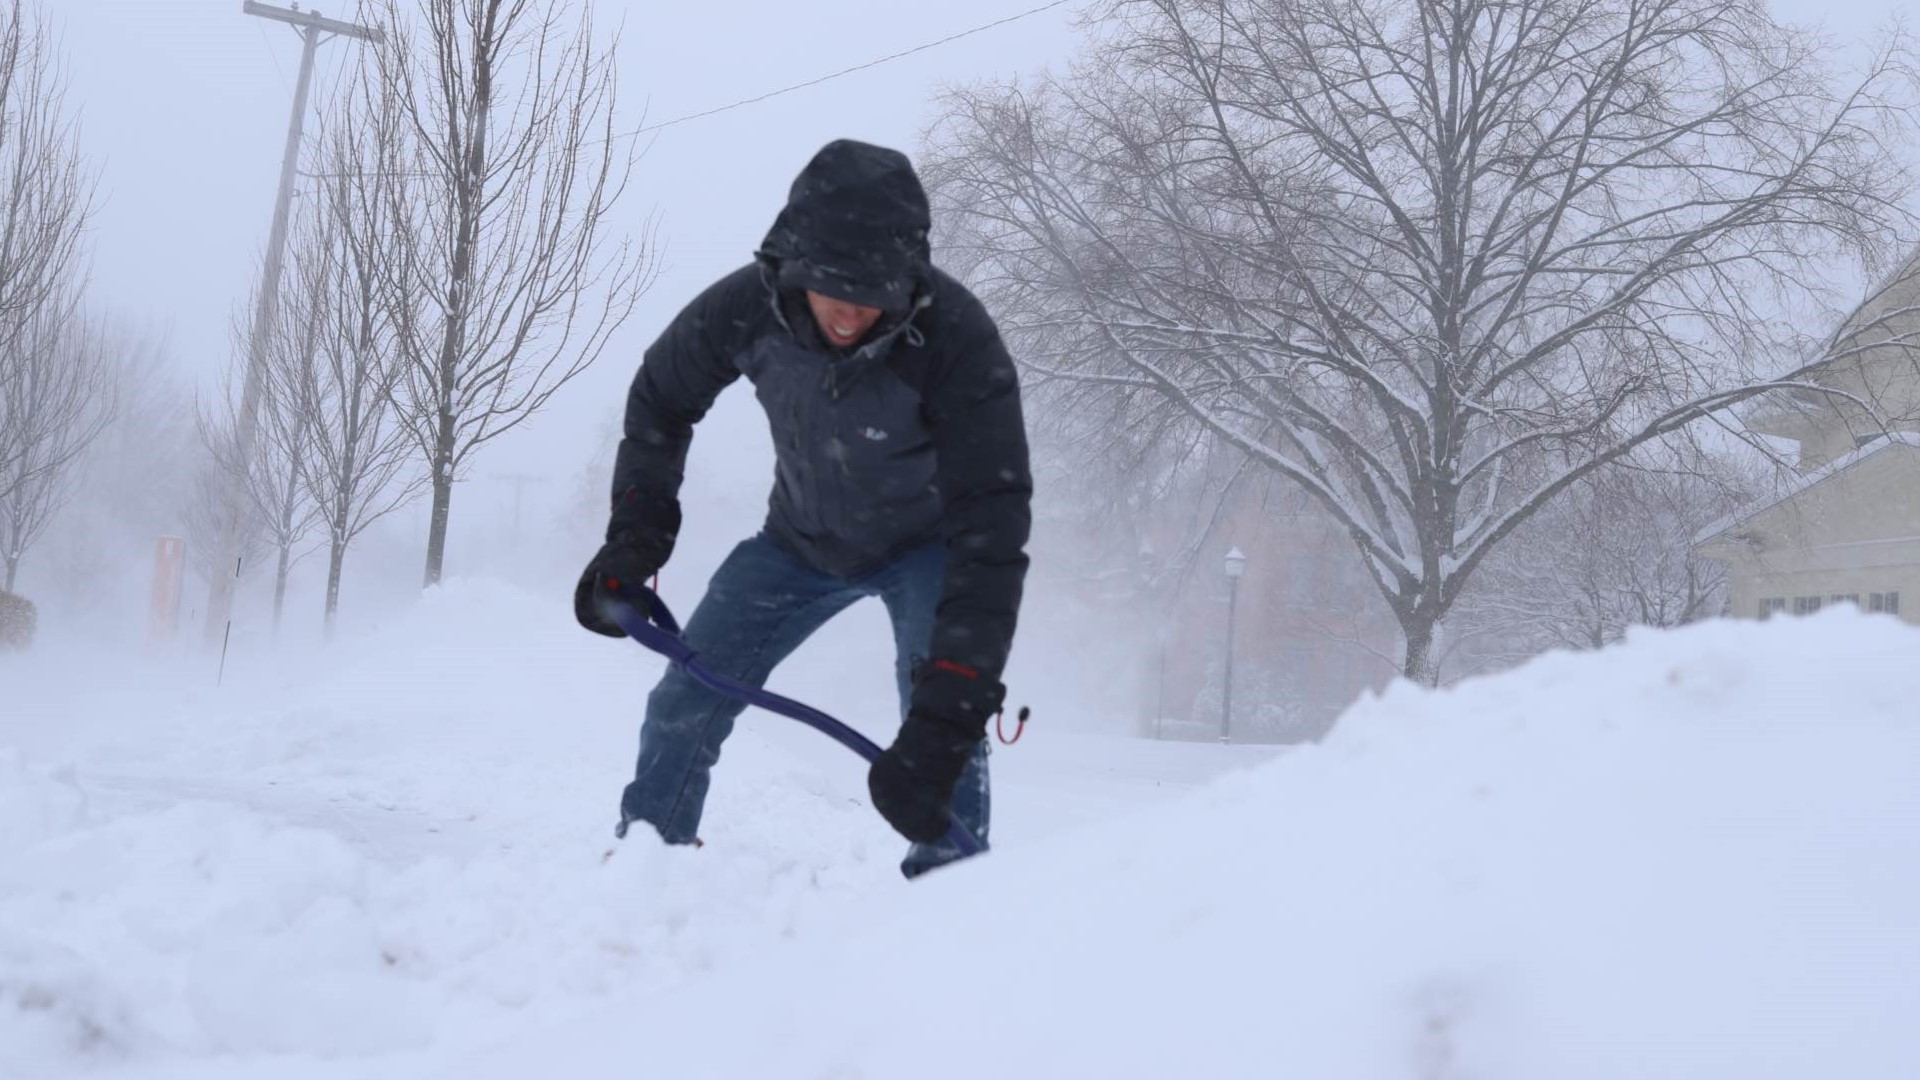 Corewell Health says 100 people die every year from heart attacks while shoveling snow.